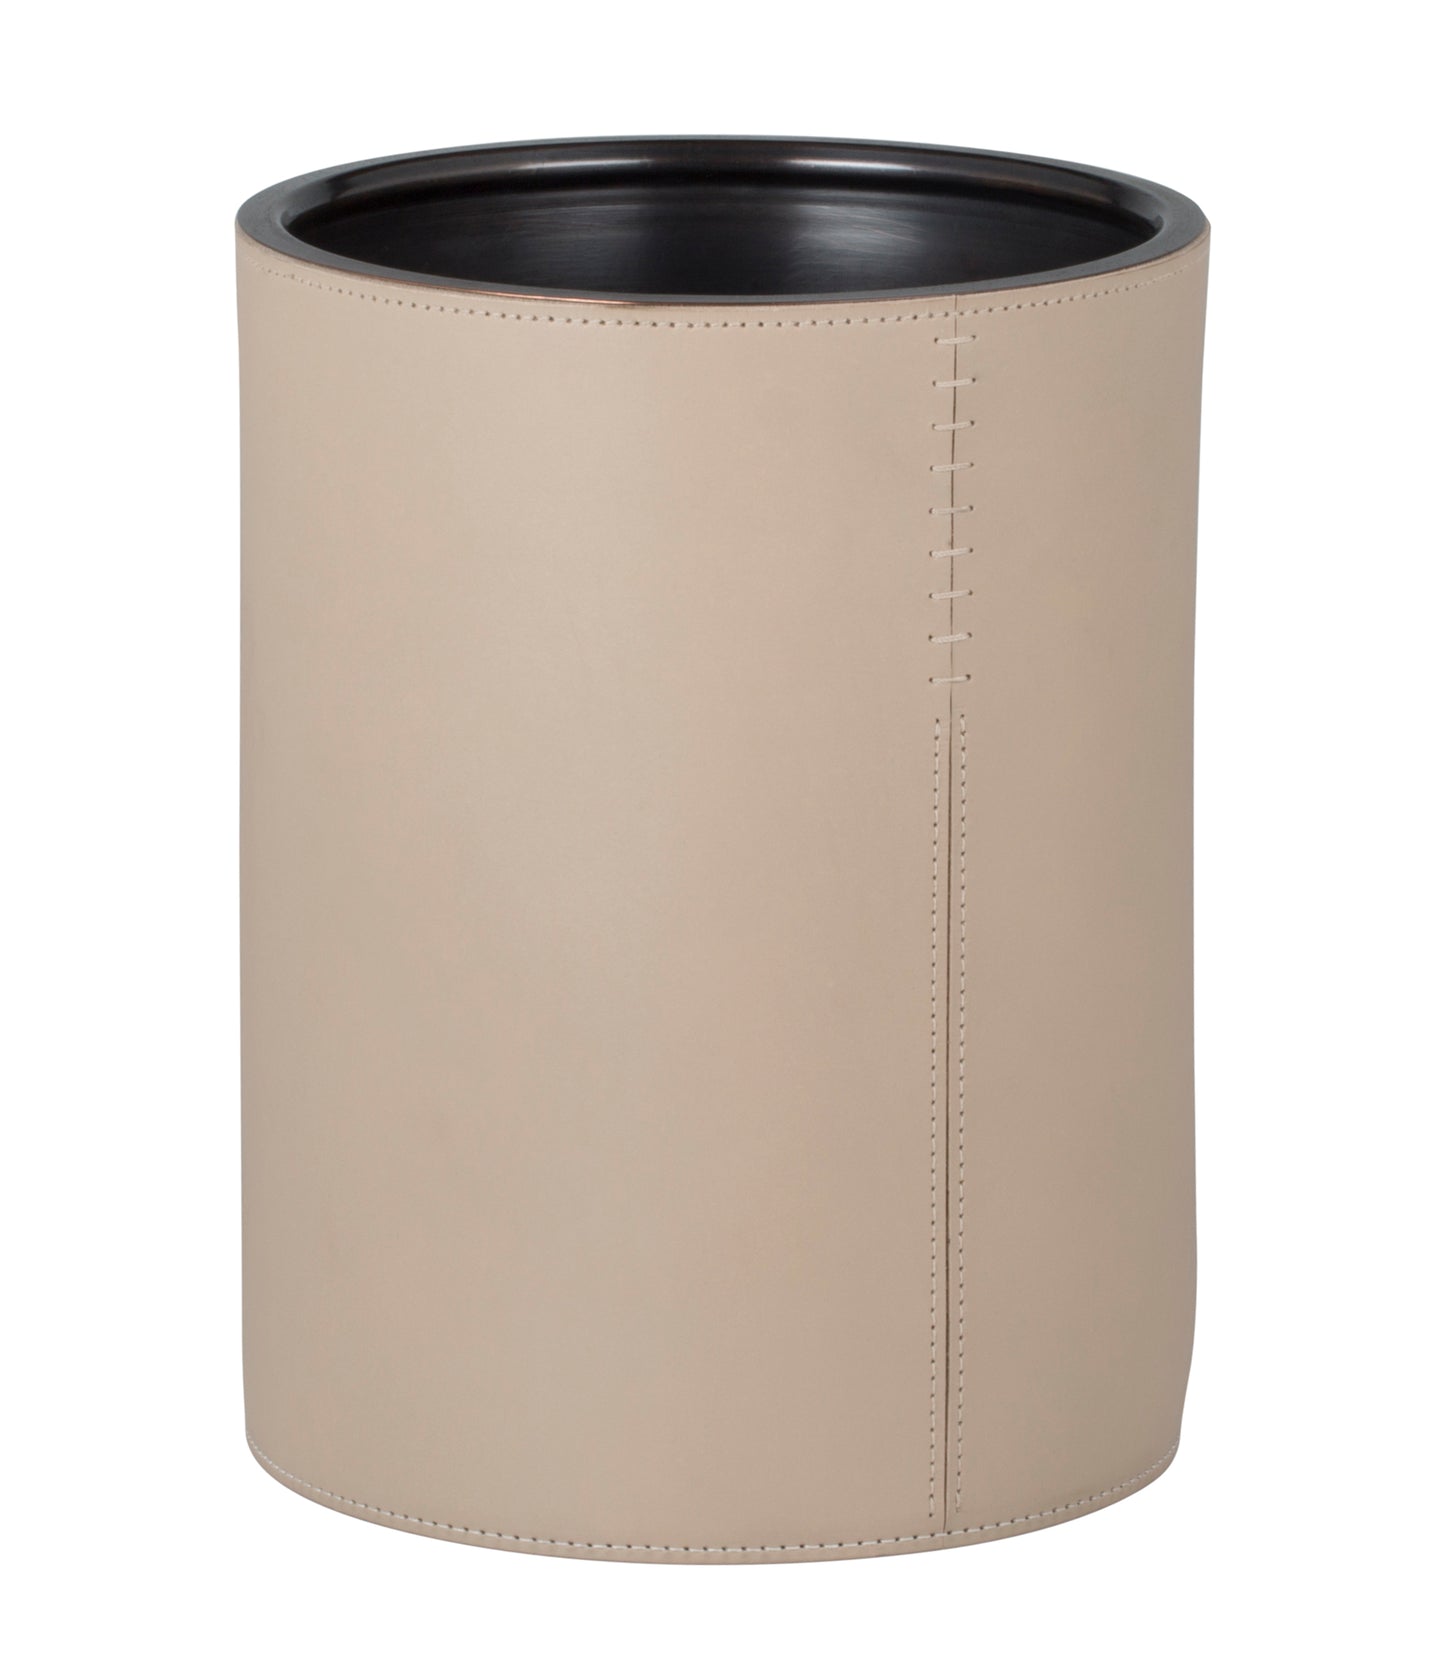 Orvieto Saddle Leather Wastepaper Bin With Metal Inner Container